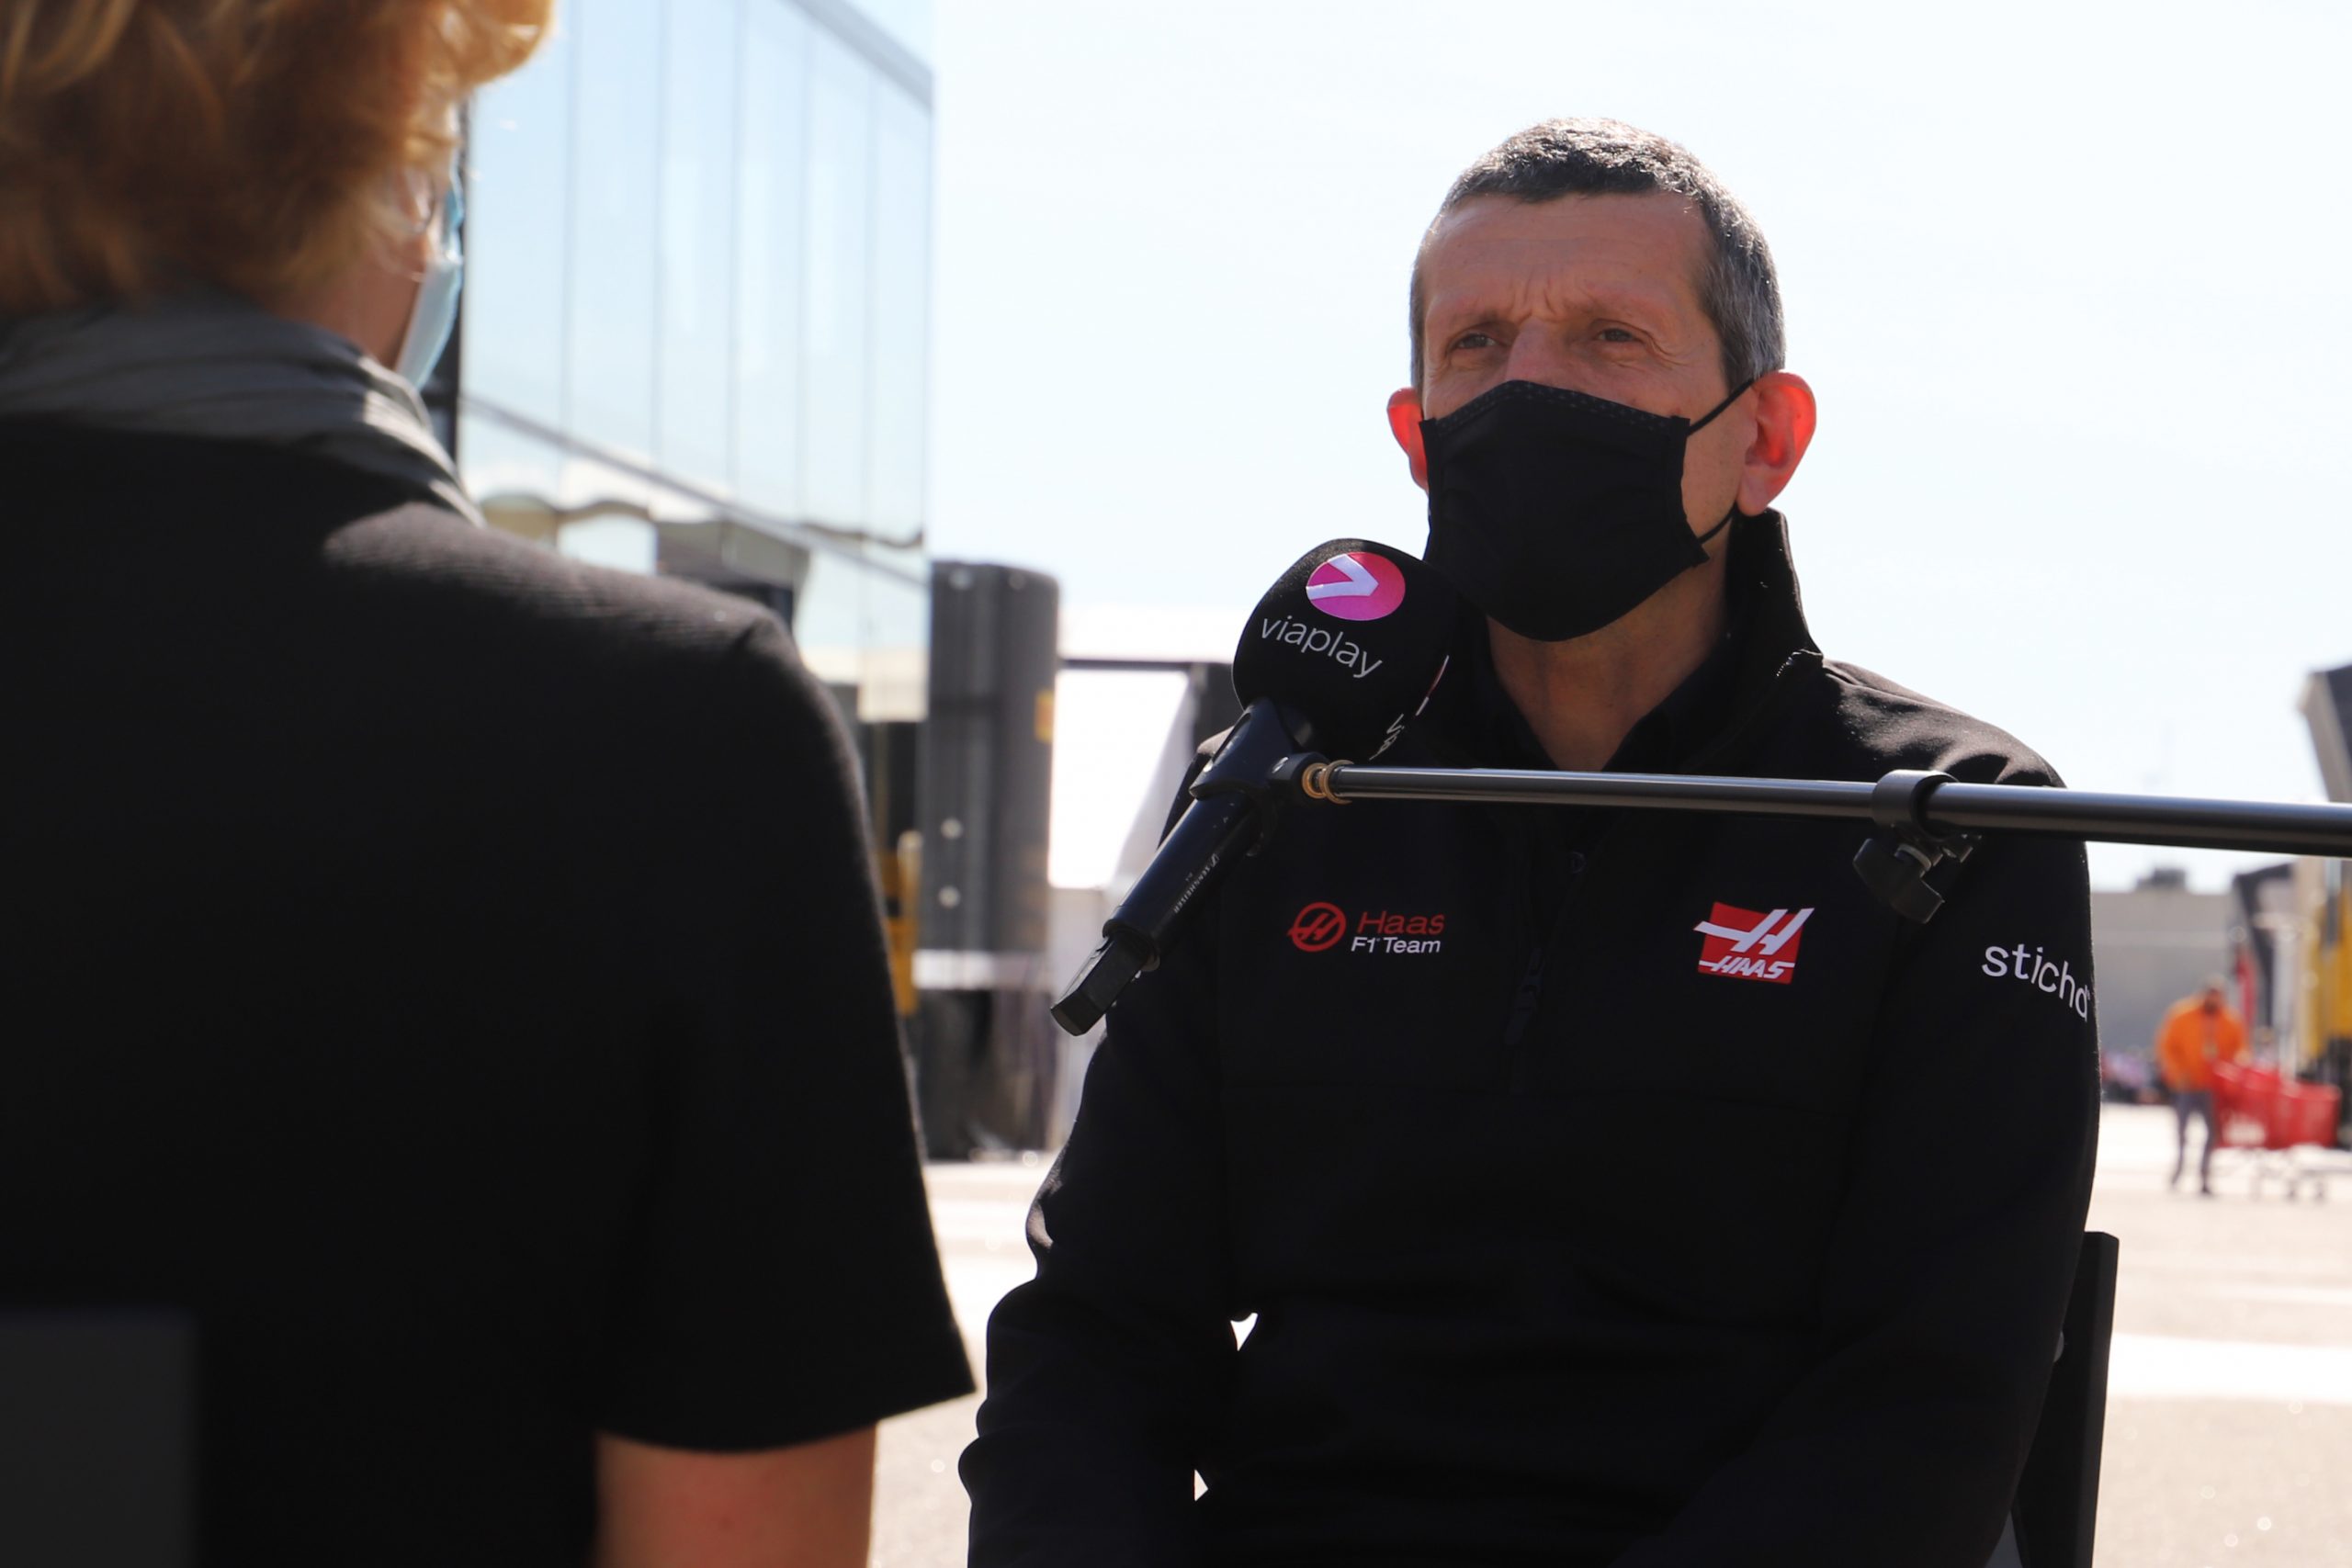 2020 Portuguese Grand Prix, Friday - Guenther Steiner (image courtesy Haas F1 Team)